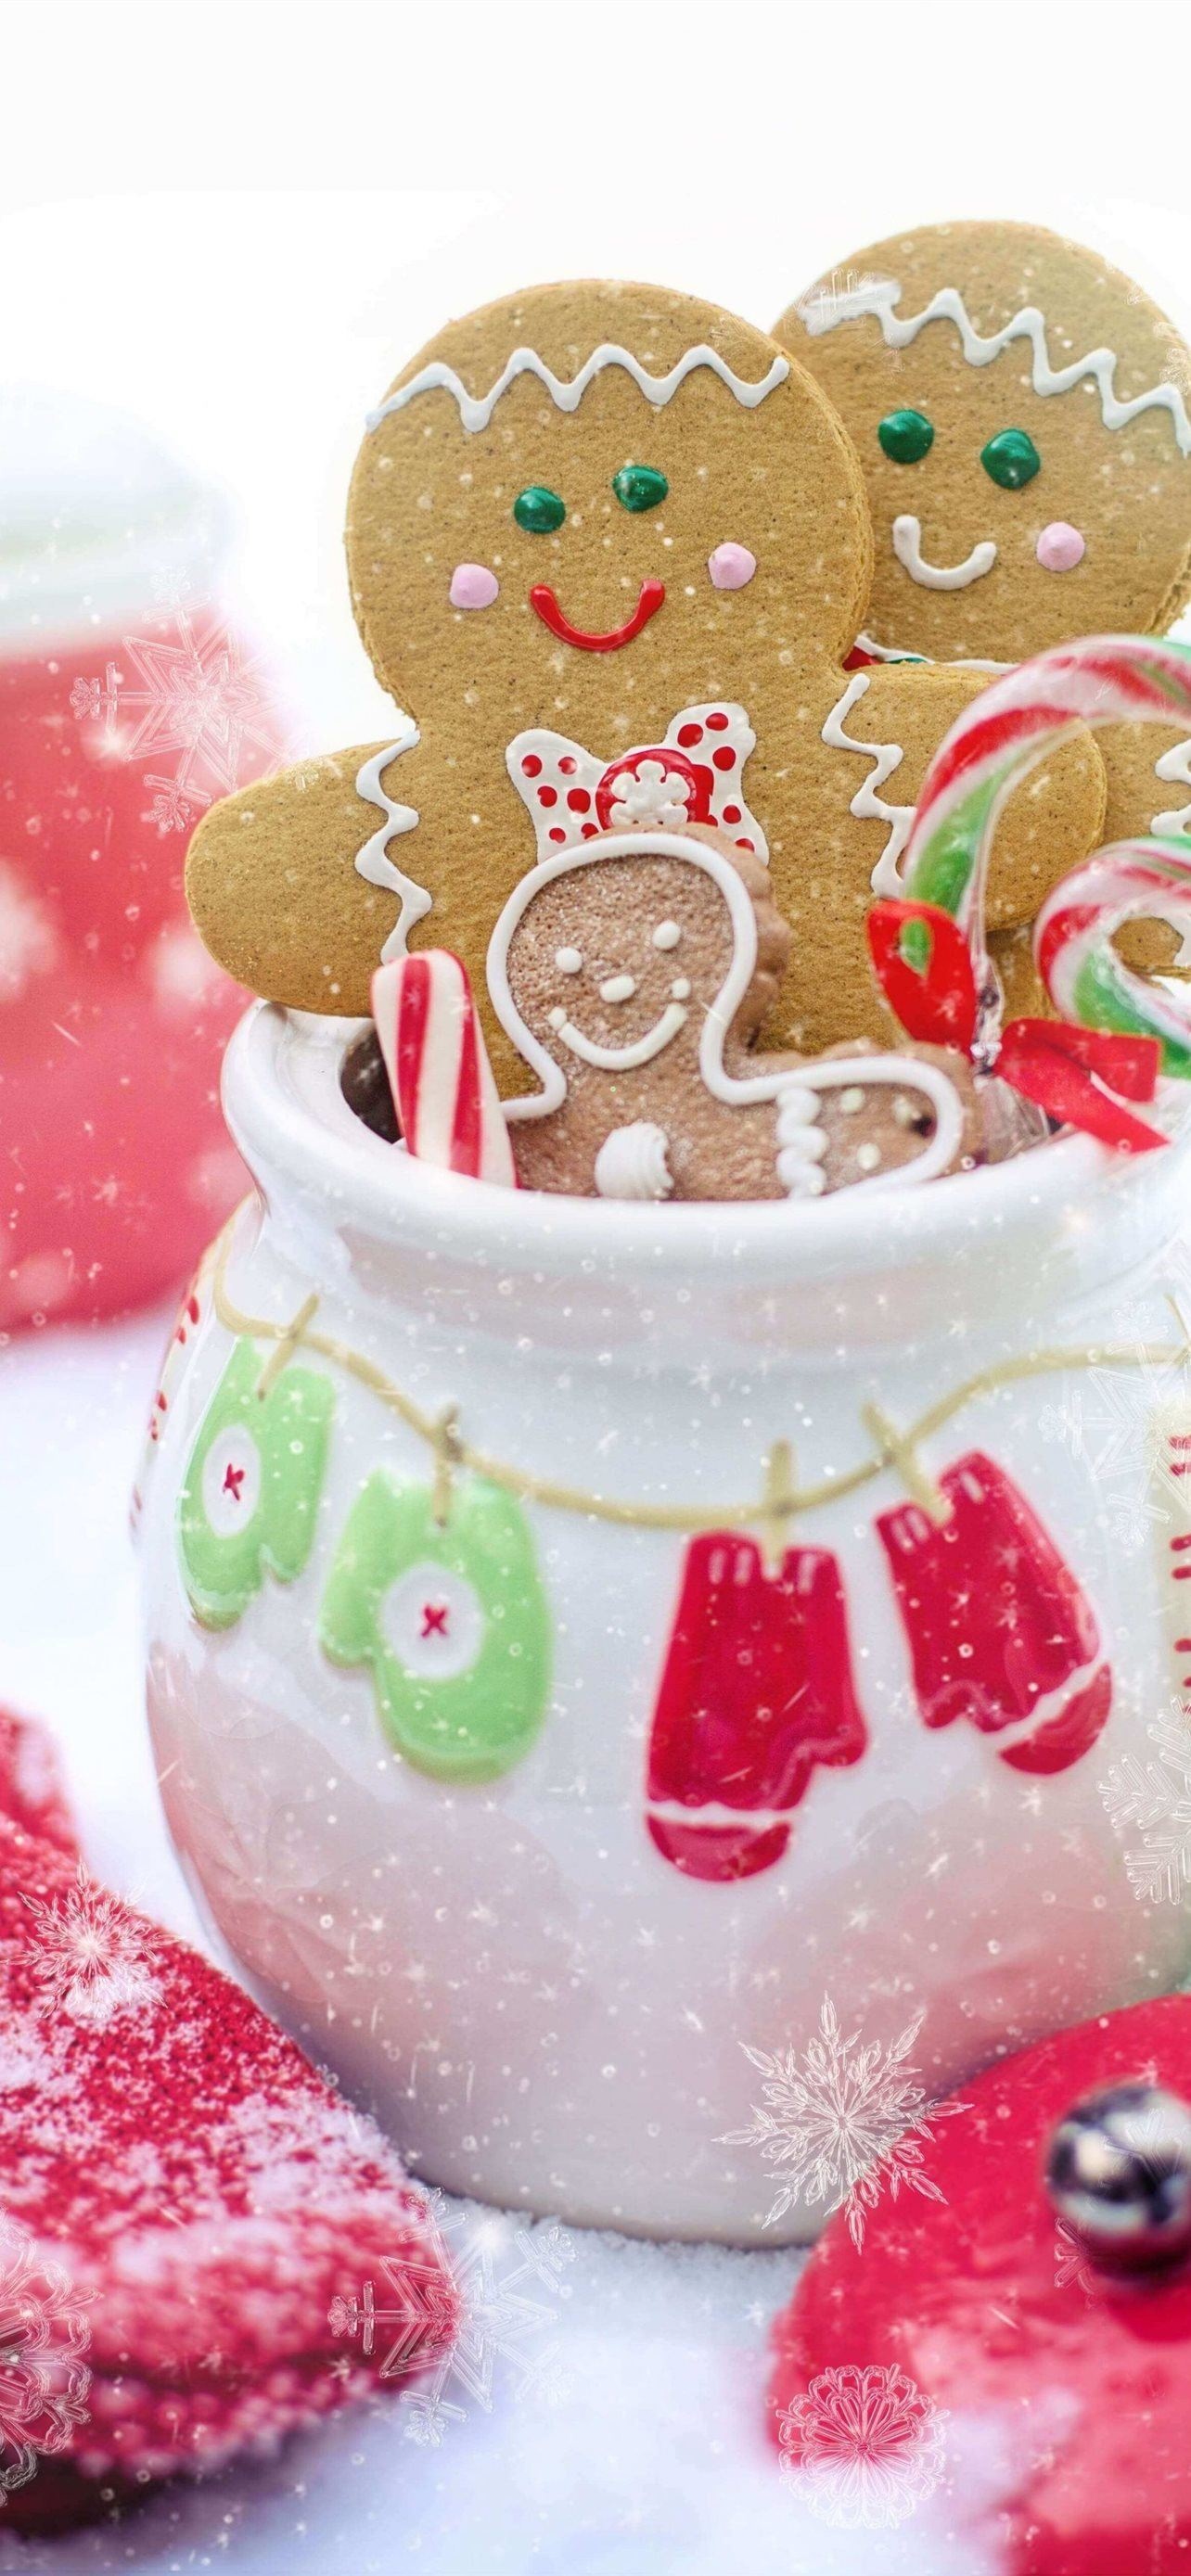 Gingerbread Man, Holiday wallpapers, Christmas-themed backgrounds, Festive phone screens, 1290x2780 HD Phone